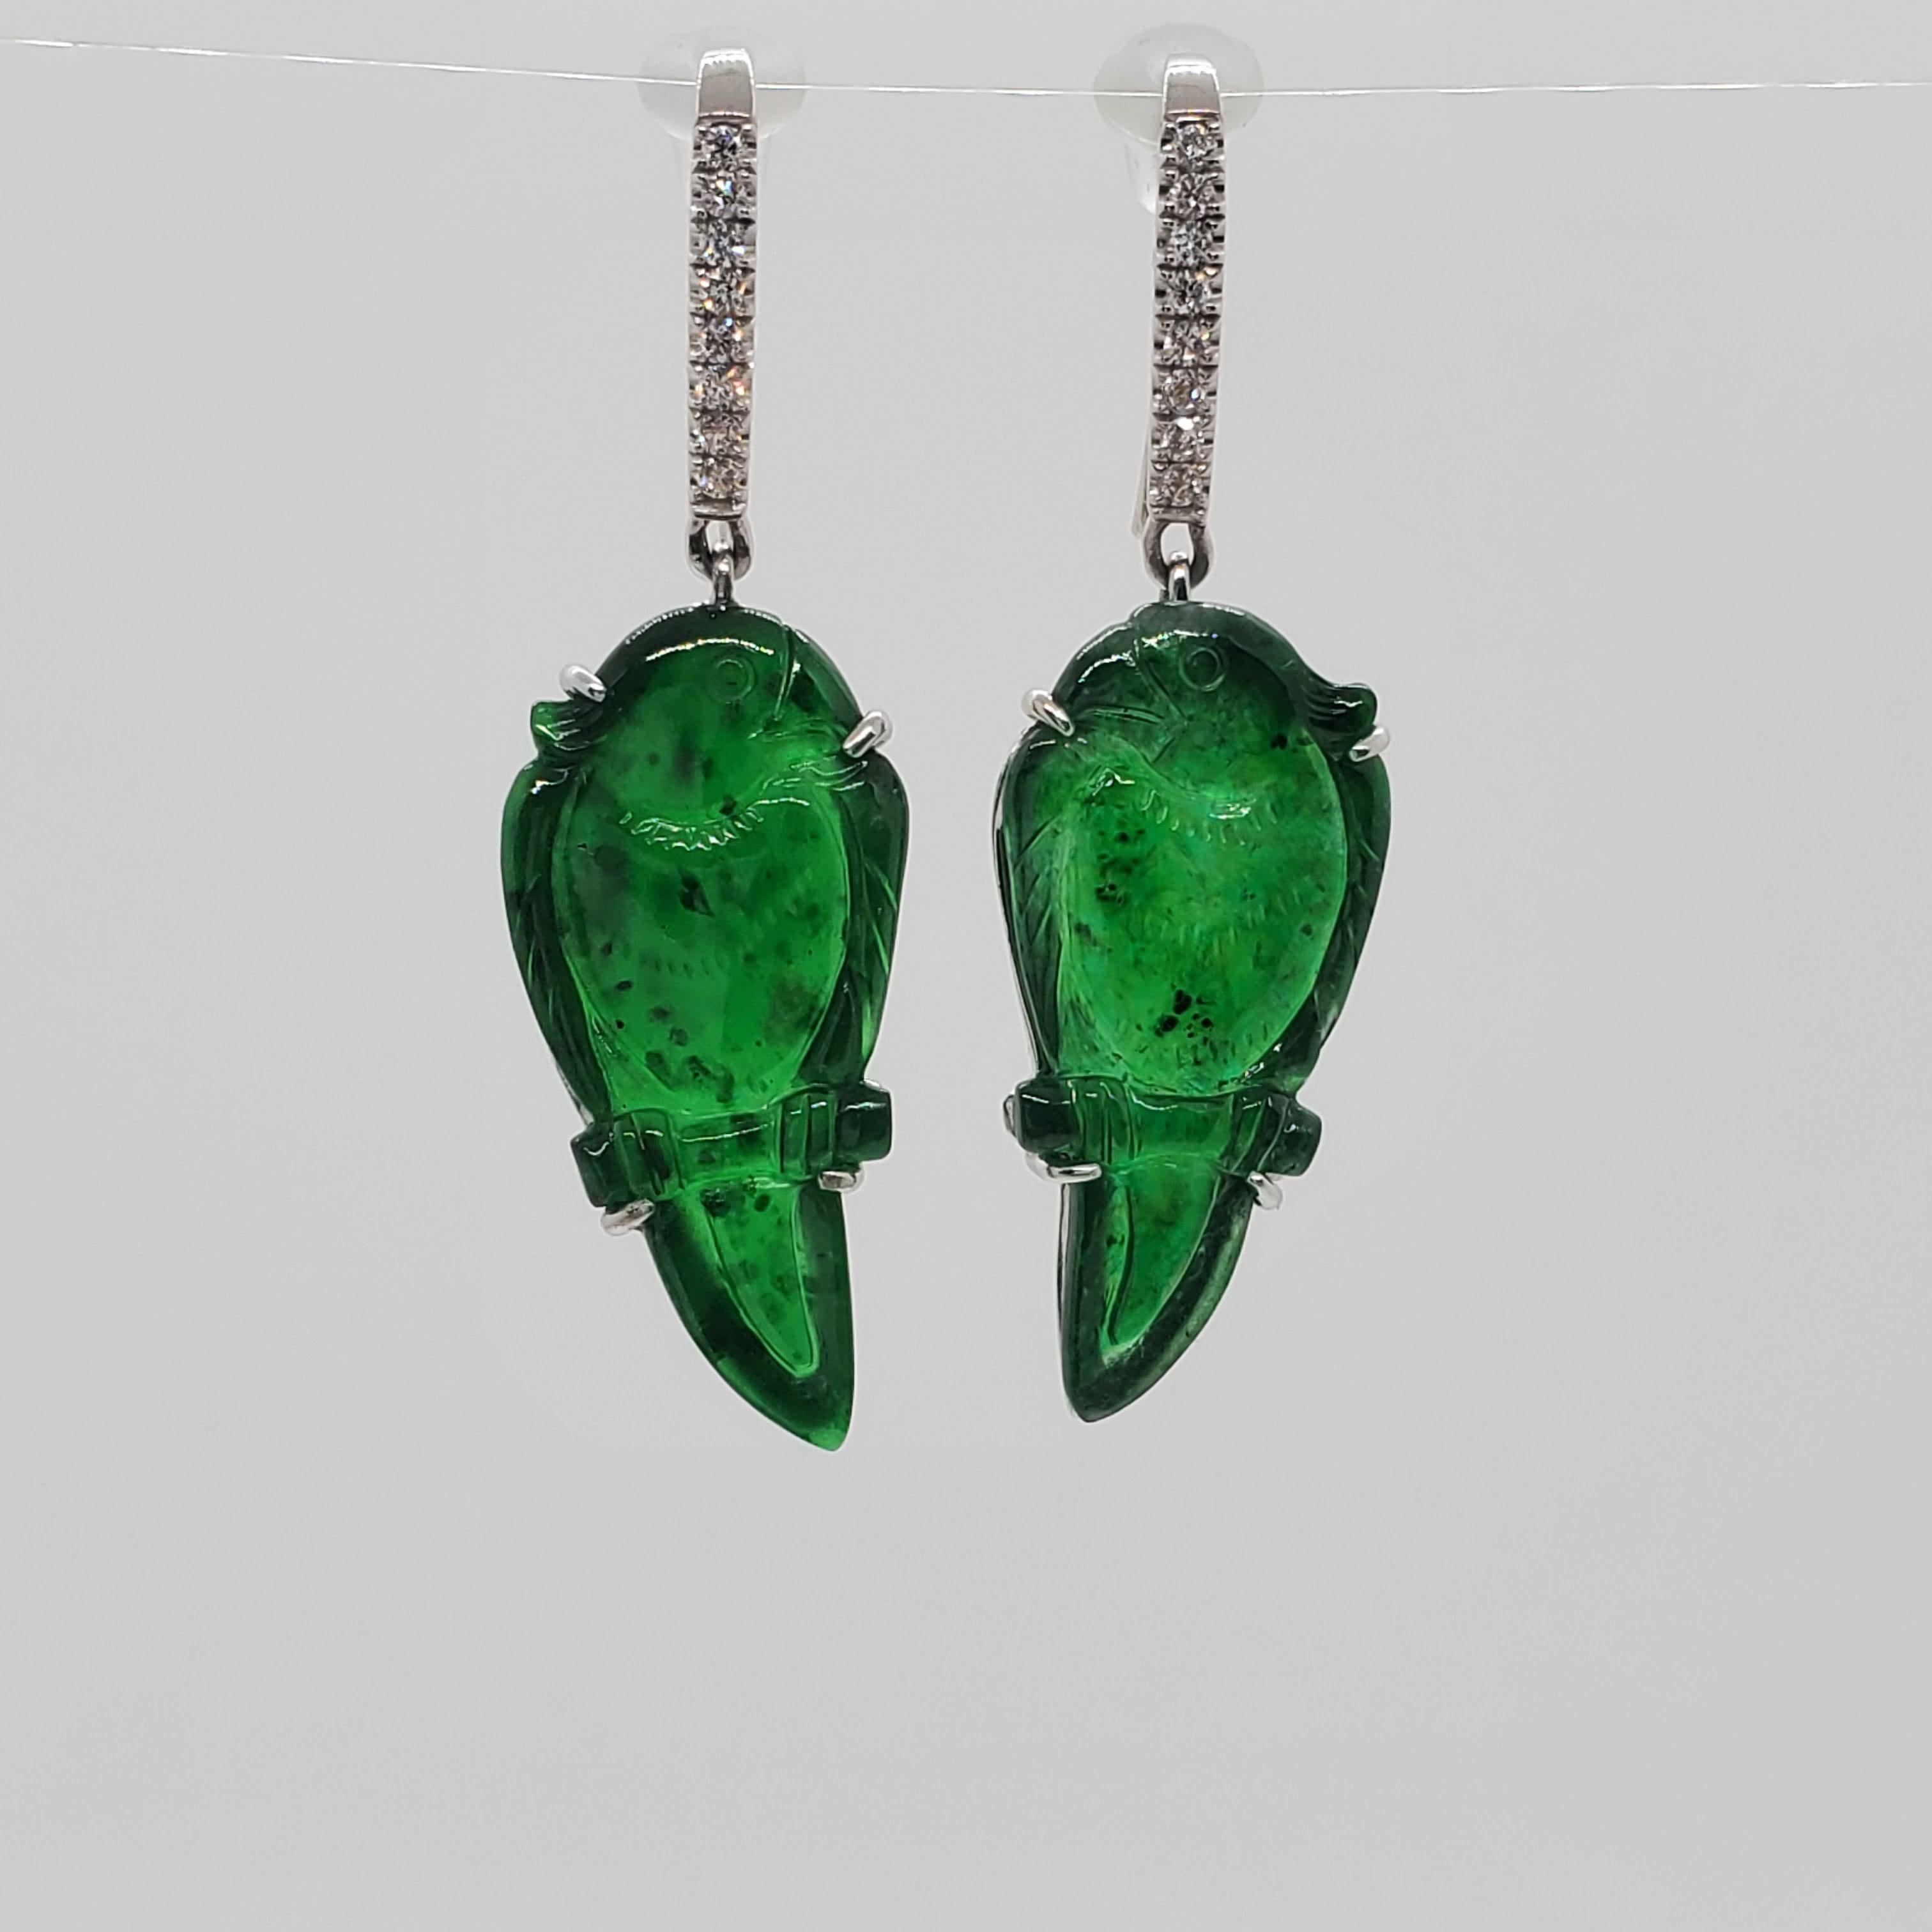 Stunning carved green jade parrots with a beautiful deep green color.  Good quality, white and bright diamond rounds weighing 0.15 ct.  Handmade dangle earrings in platinum.  These earrings are unique and would work for day or night wear.  Excellent